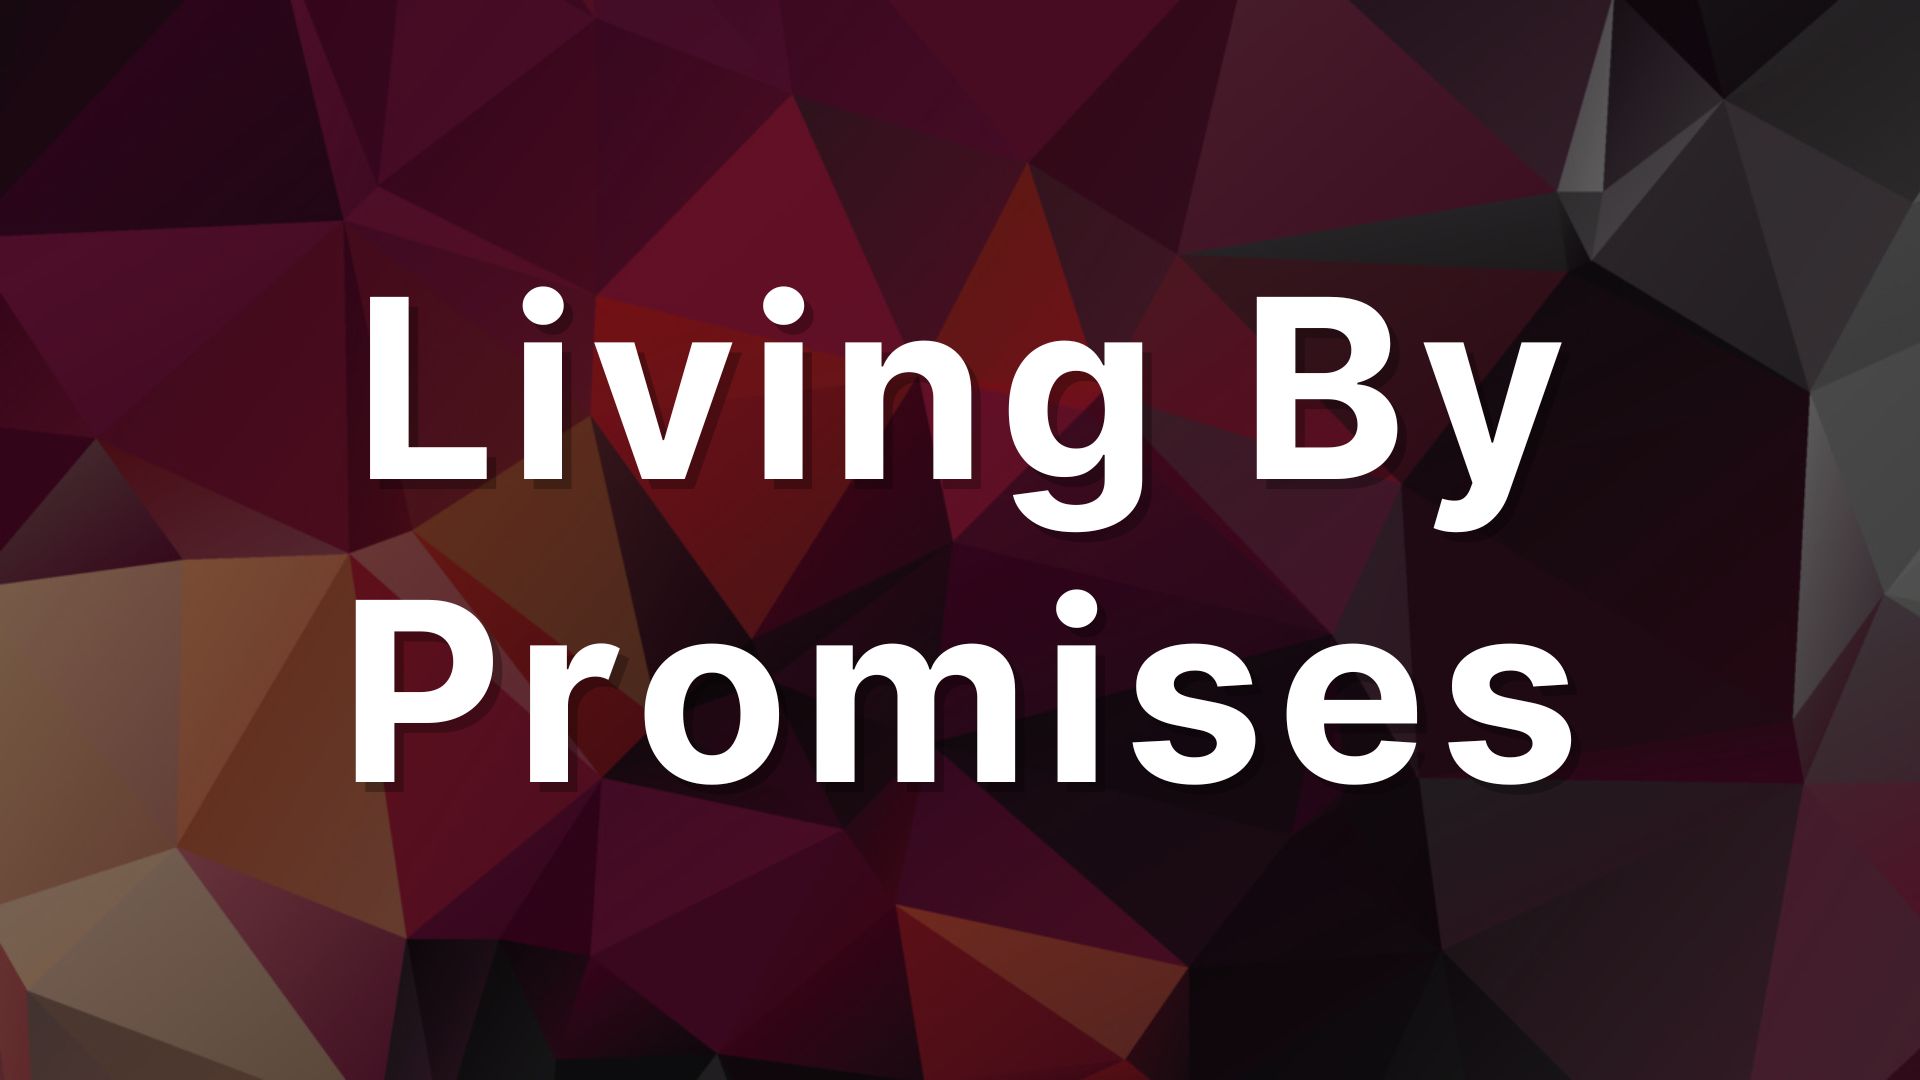 Living By Promises